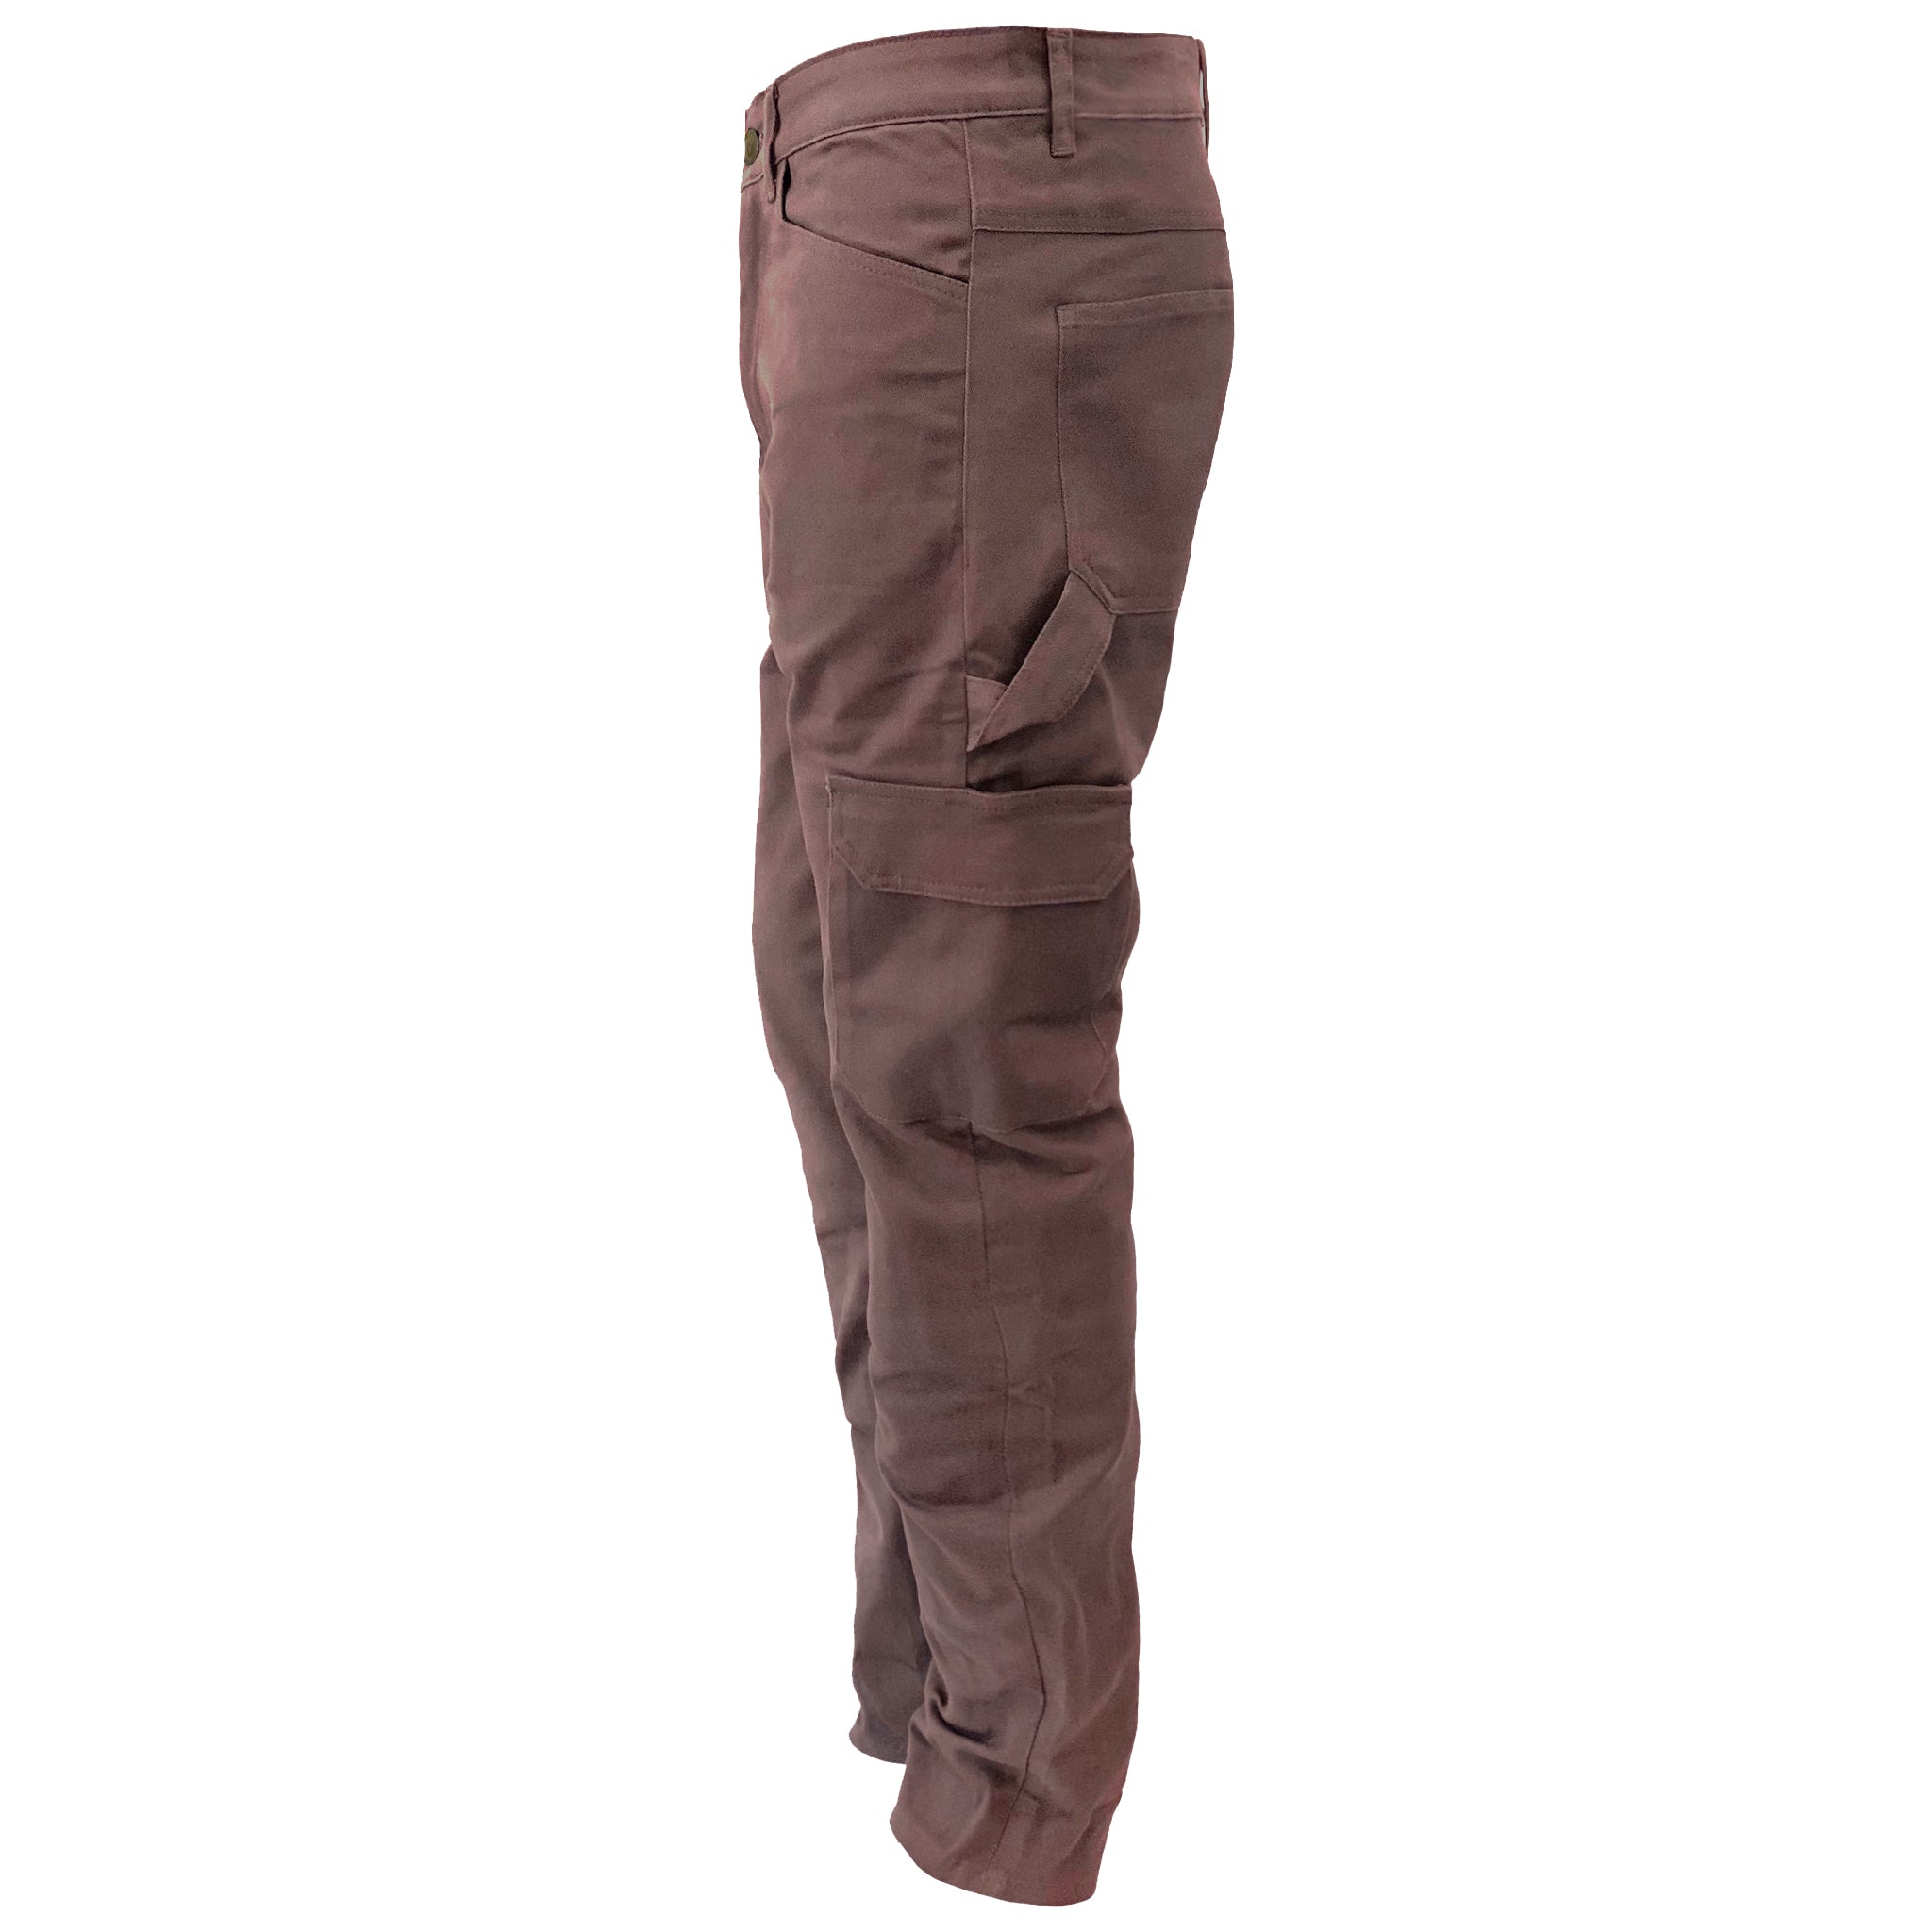 Relaxed Fit Cargo Pants - Light Cacao with Pads